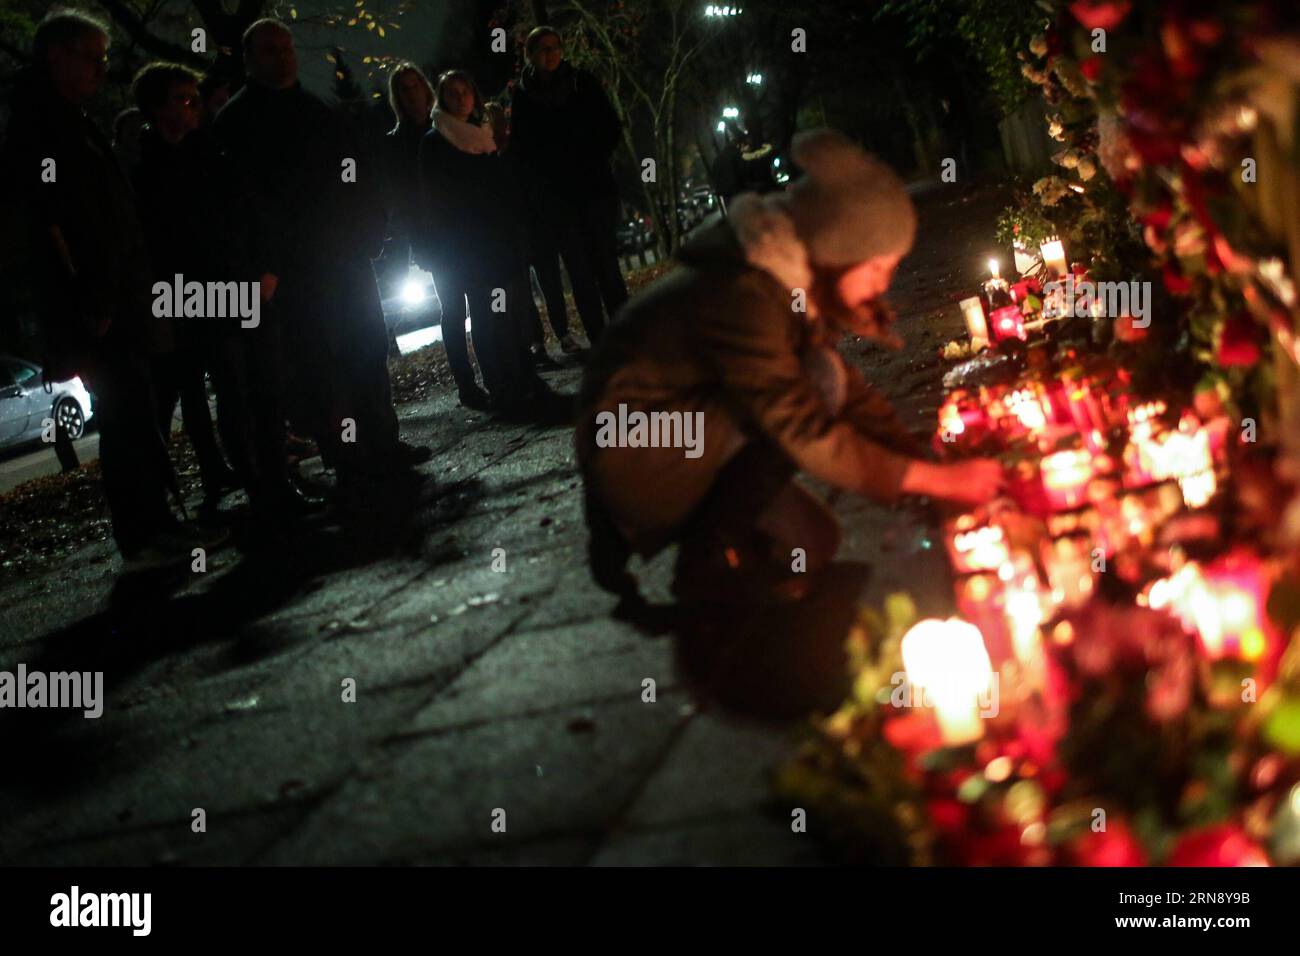 (151110) -- HAMBURG, Nov. 10, 2015 -- Local residents lay flowers and candles outside the home of former German chancellor Helmut Schmidt, in Hamburg, Germany, on Nov. 10, 2015. Helmut Schmidt, who served as Chancellor of West Germany from 1974 to 1982, died at age of 96 at his home in Hamburg on Tuesday afternoon, according to German media. ) GERMANY-HAMBURG-SCHMIDT-PASSING AWAY ZhangxFan PUBLICATIONxNOTxINxCHN Stille Trauer vor Helmut Schmidts Wohnhaus in Hamburg   Hamburg Nov 10 2015 Local Residents Lay Flowers and Candles outside The Home of Former German Chancellor Helmut Schmidt in Hambu Stock Photo